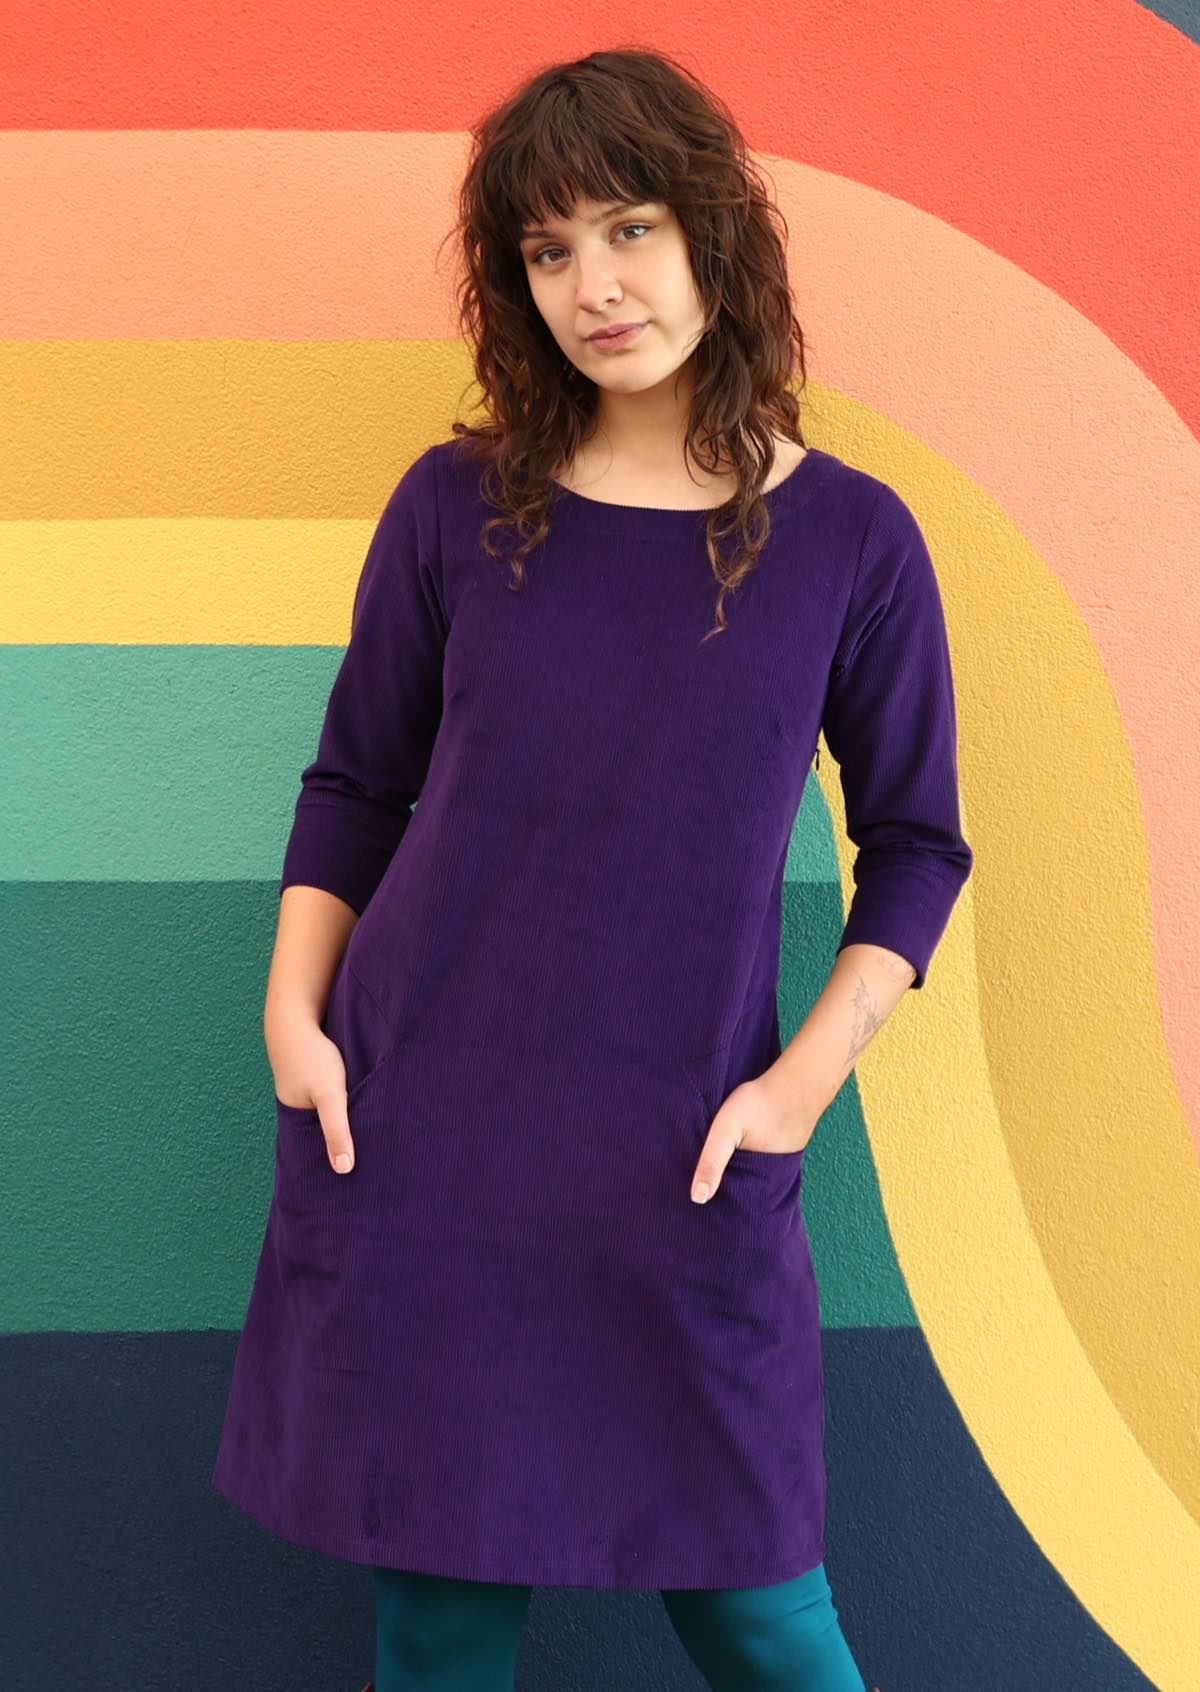 Bright purple corduroy dress with 3/4 sleeves with detailed cuff